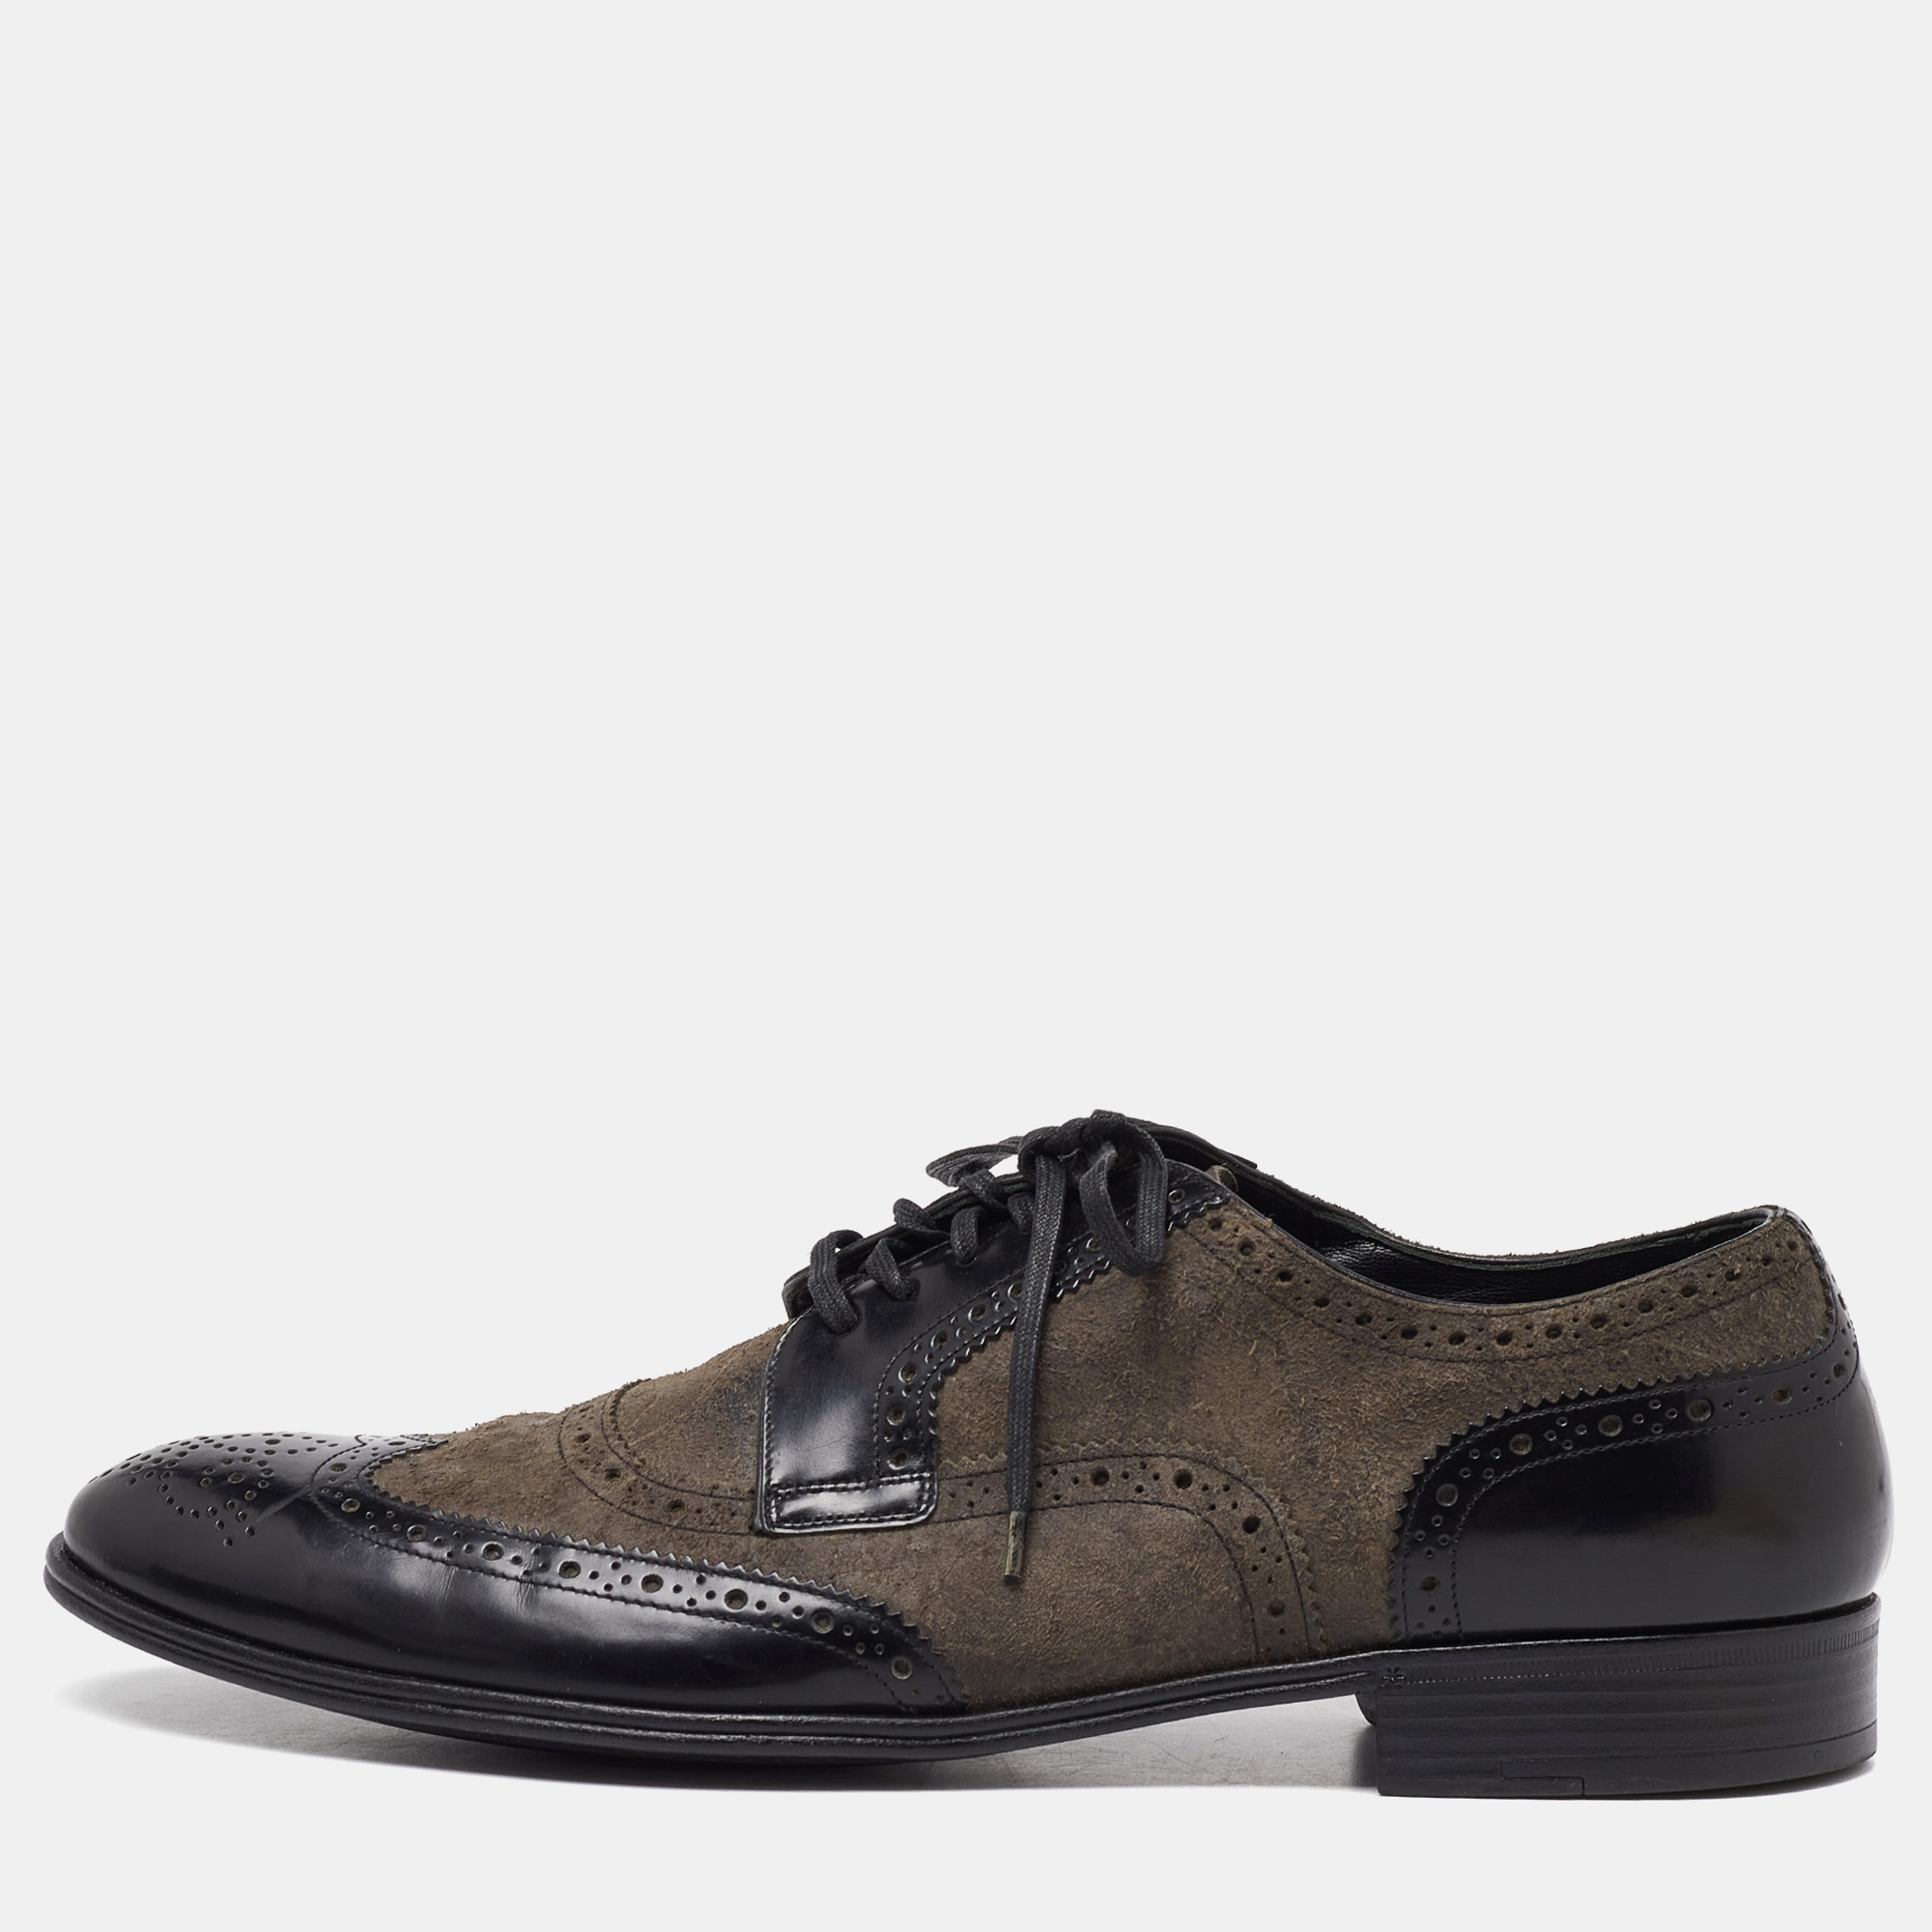 

Dolce & Gabbana Black/Grey Brogue Leather and Suede Lace Up Derby Size